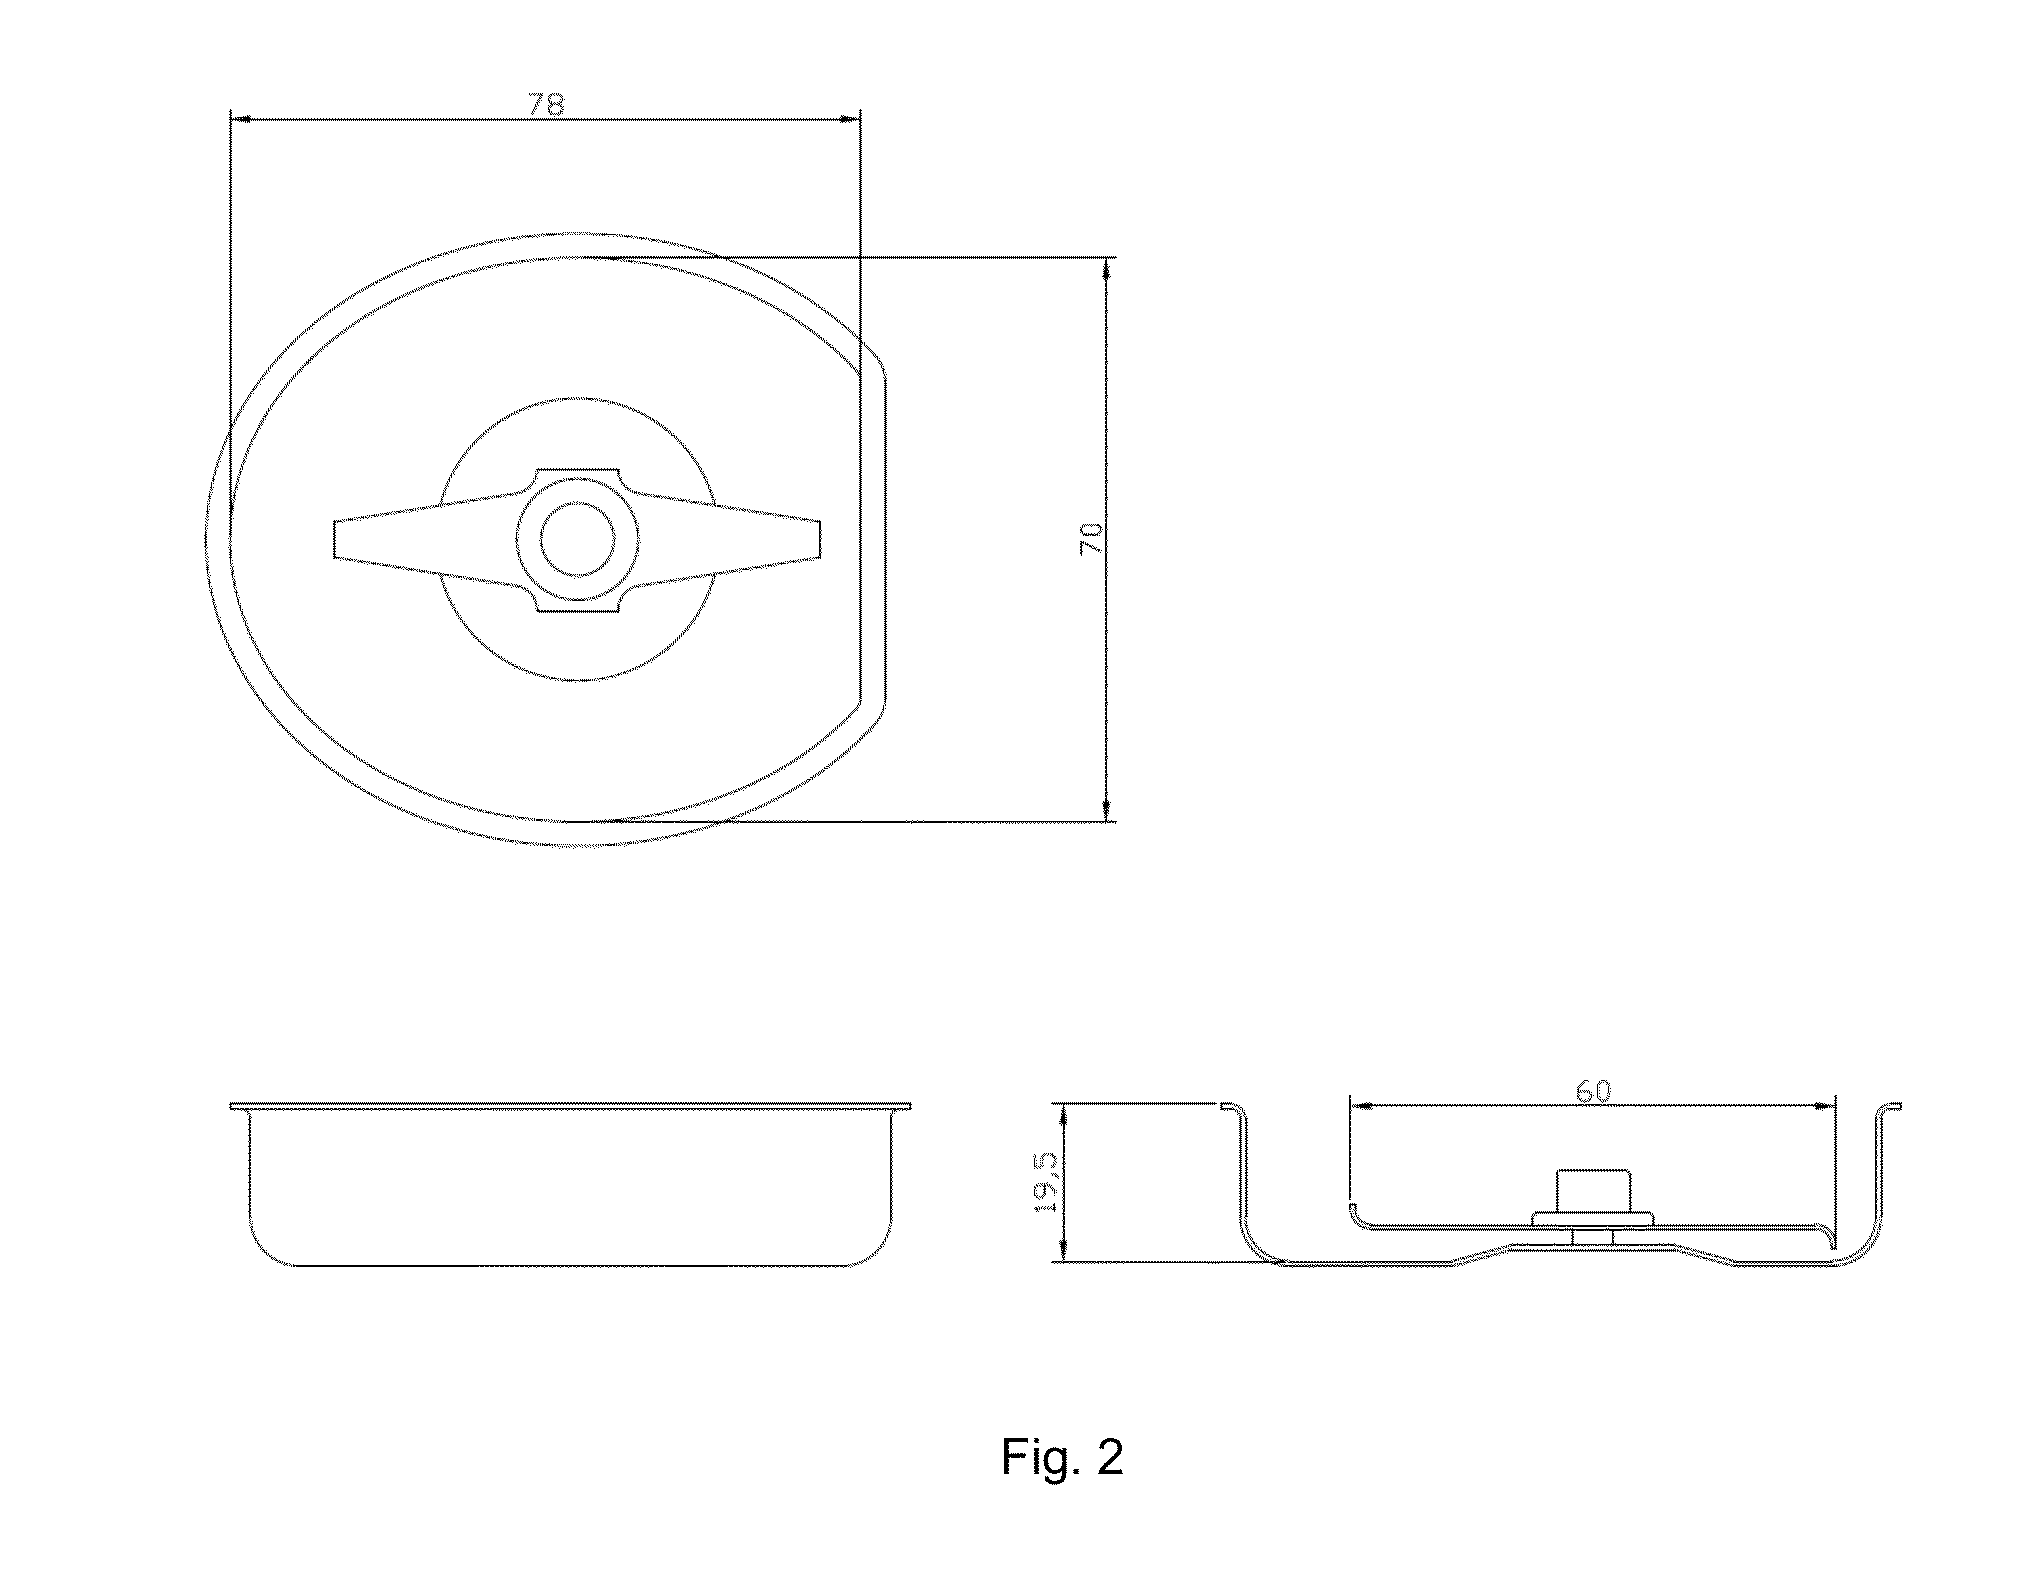 Abuse deterrent pharmaceutical compositions for controlled release